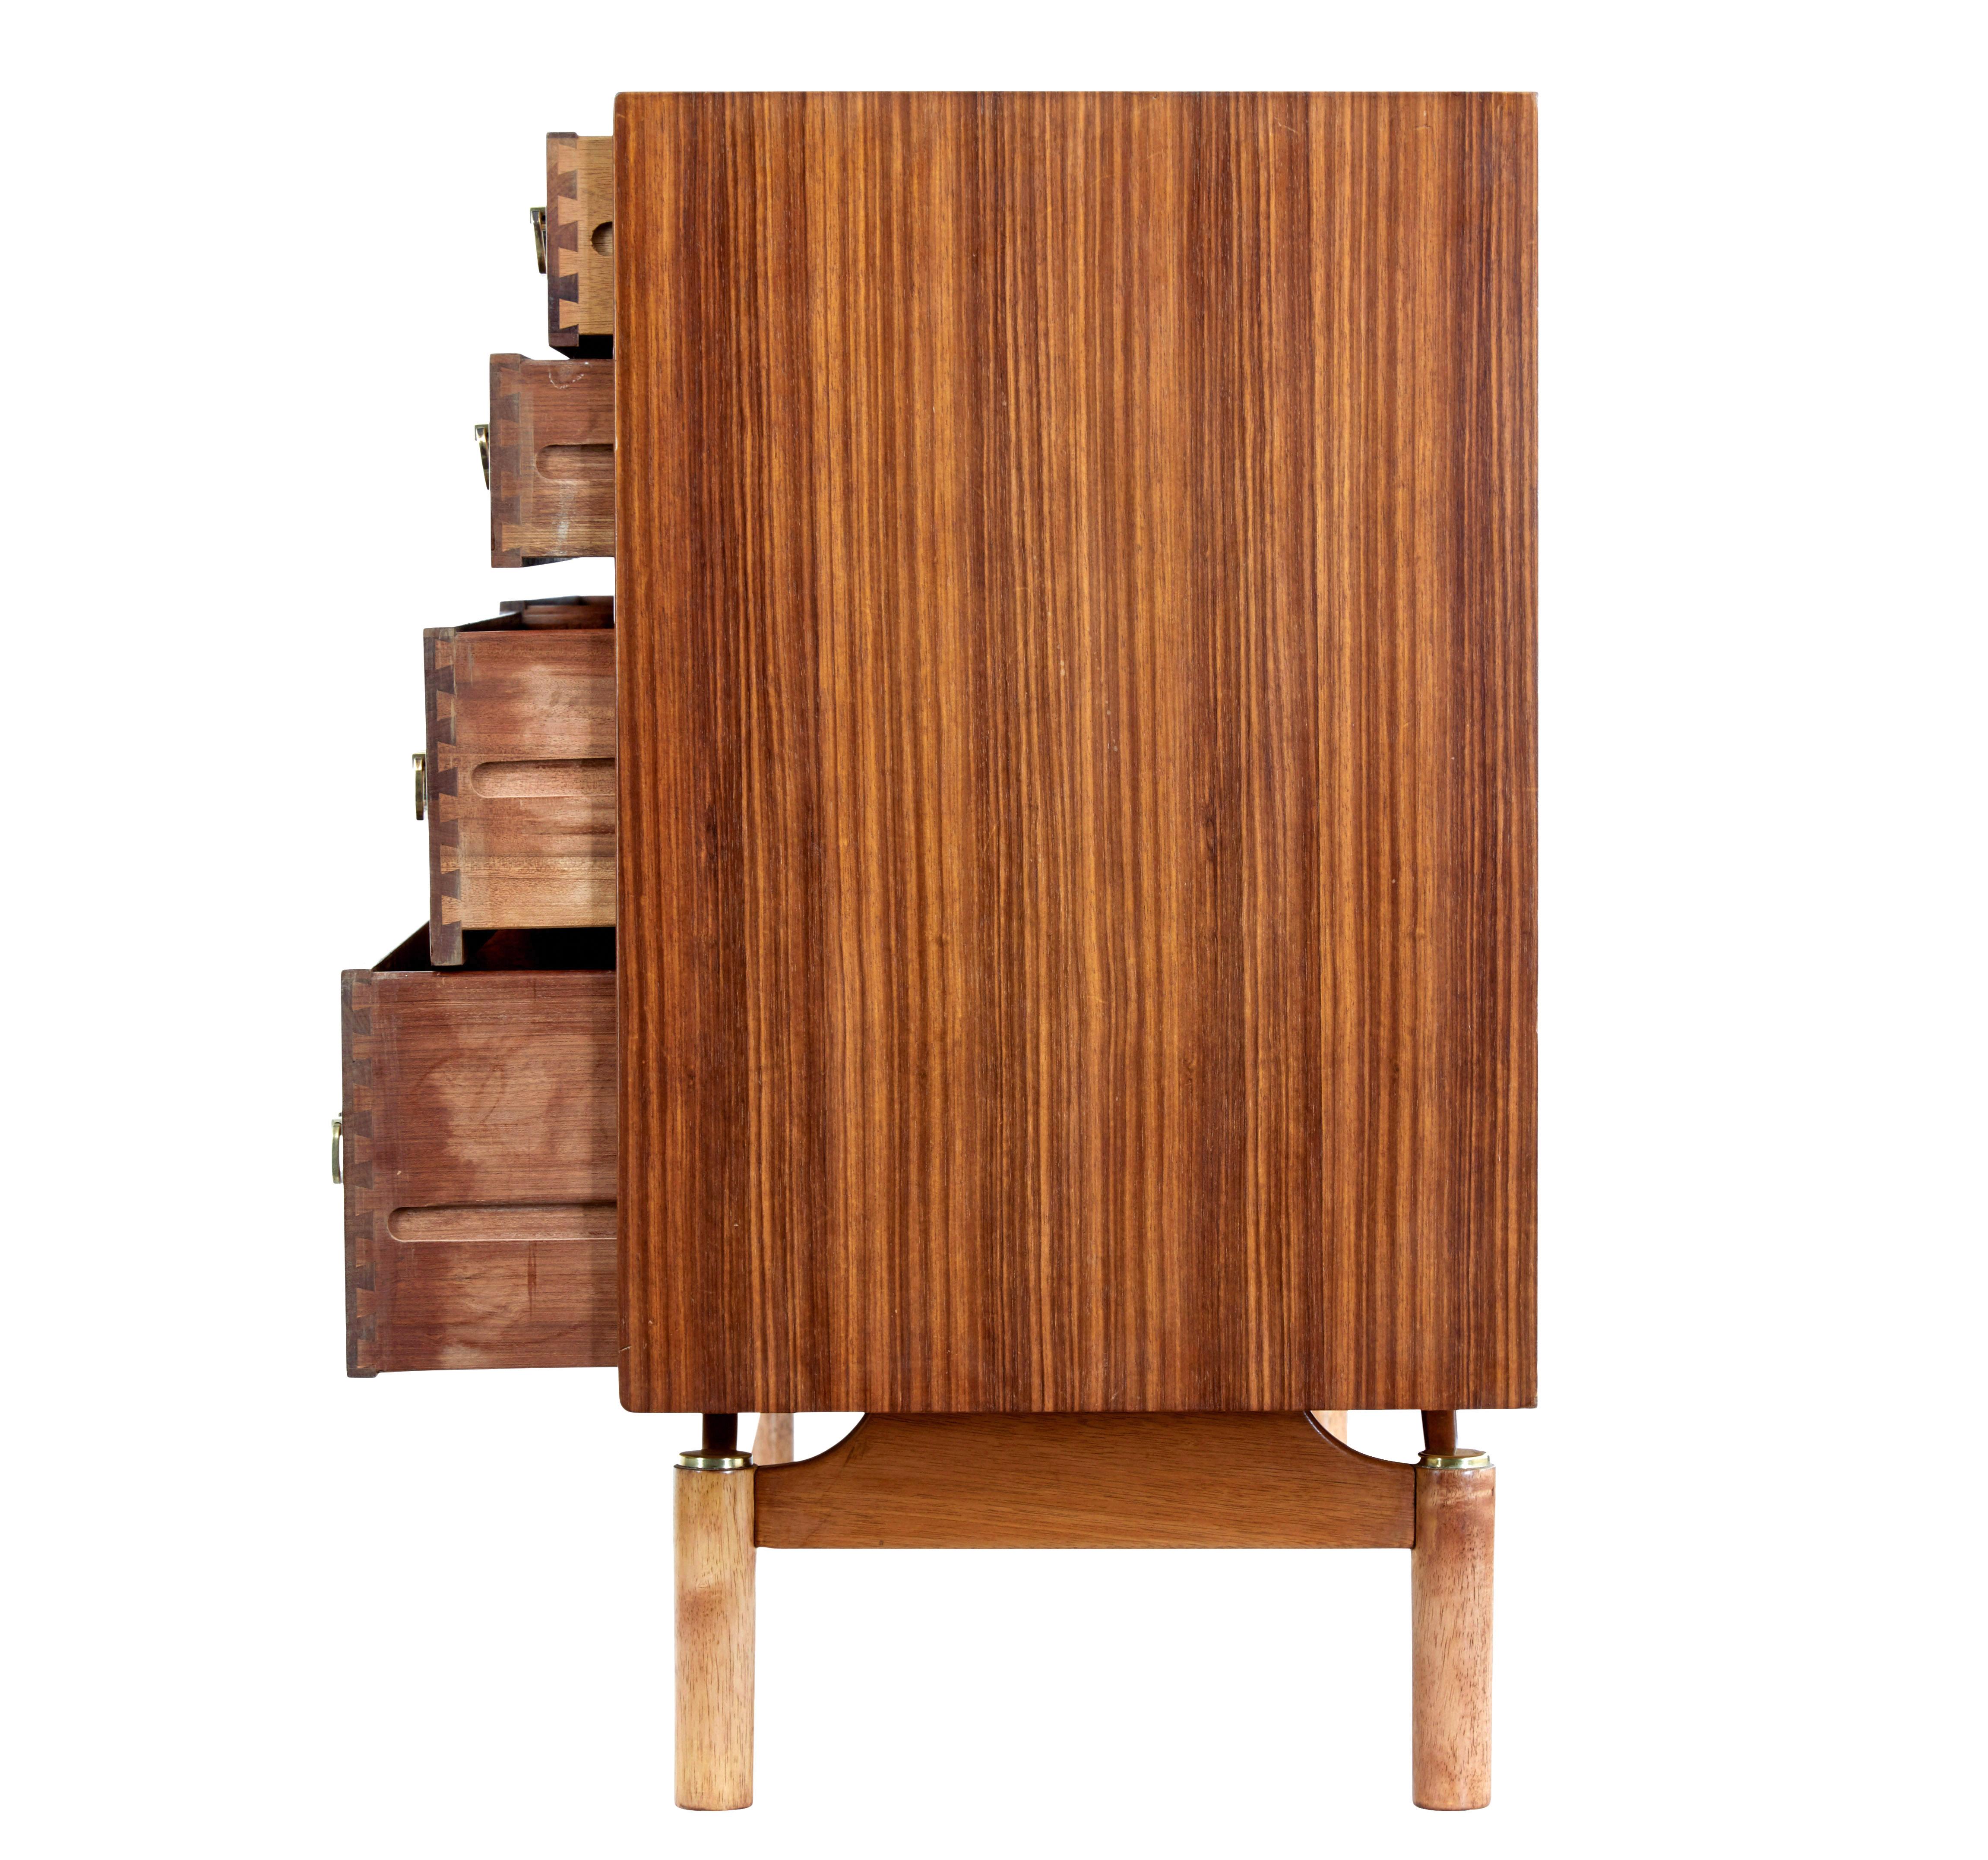 Hand-Crafted English Midcentury Teak Sideboard For Sale